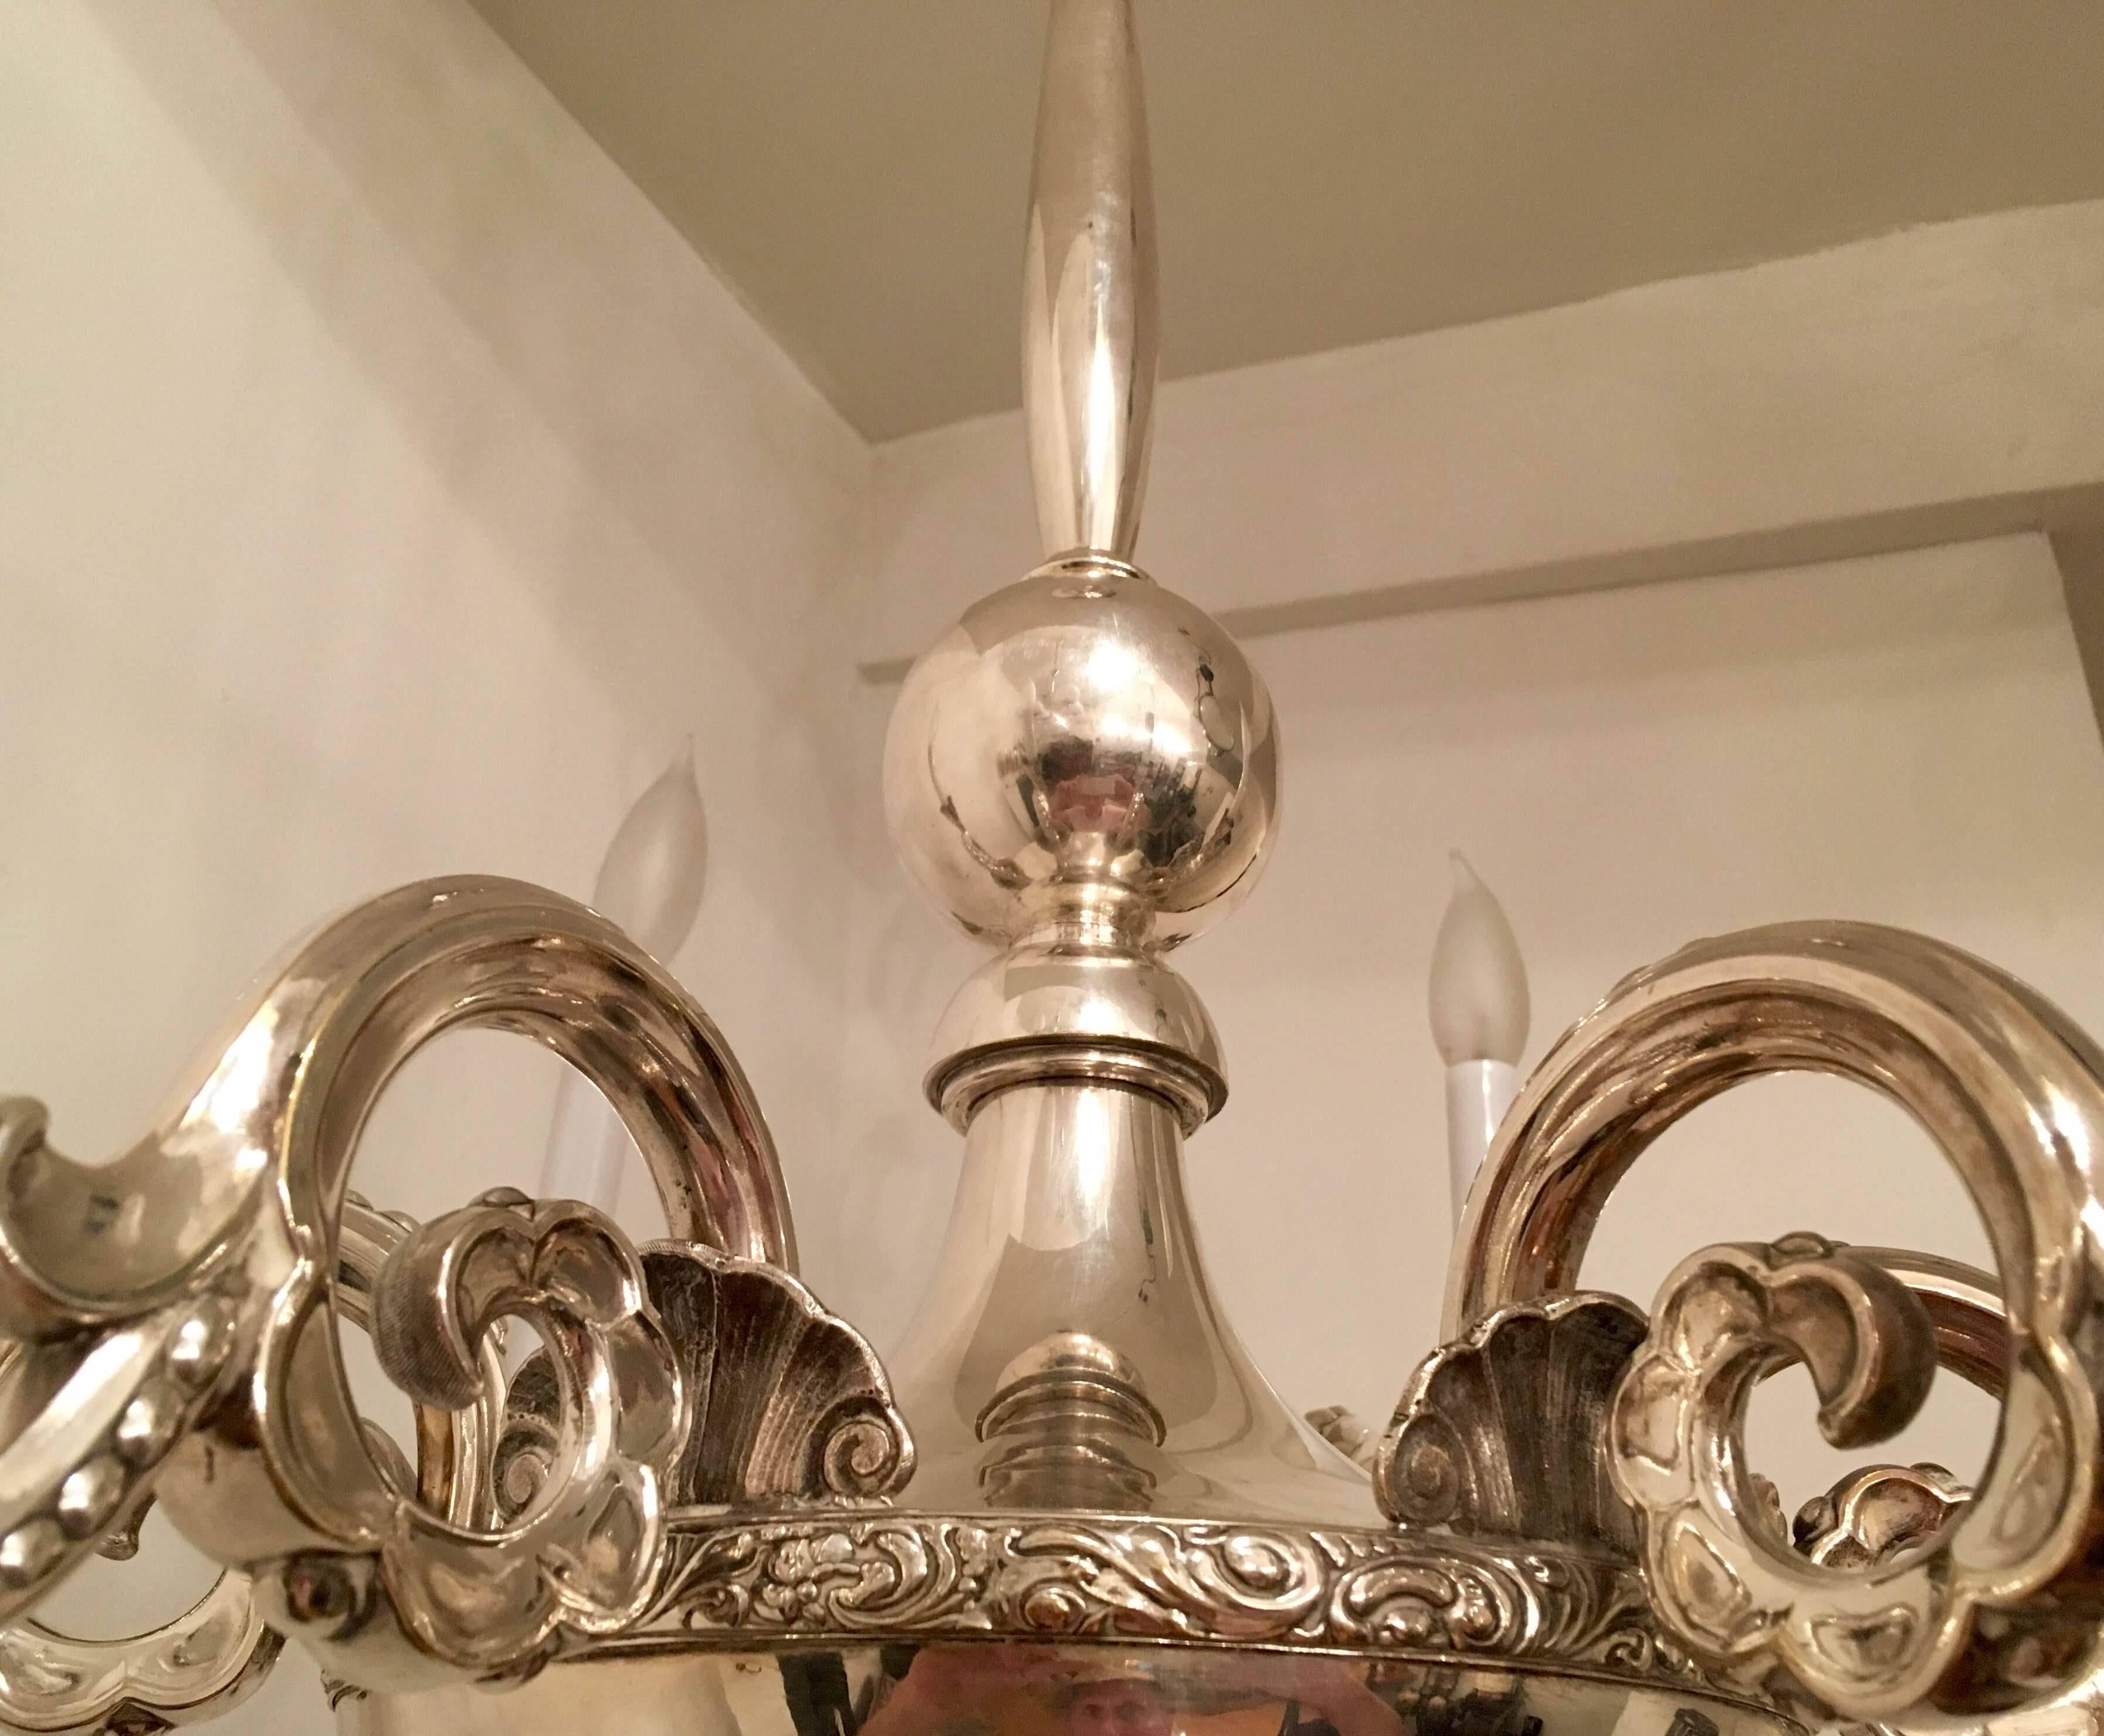 A wonderful original 1920s Grace period Swedish silver plated six arm chandelier designed by Elis Bergh for CG Hallberg. Newly rewired. Signed with makers marks. A second chandelier available.